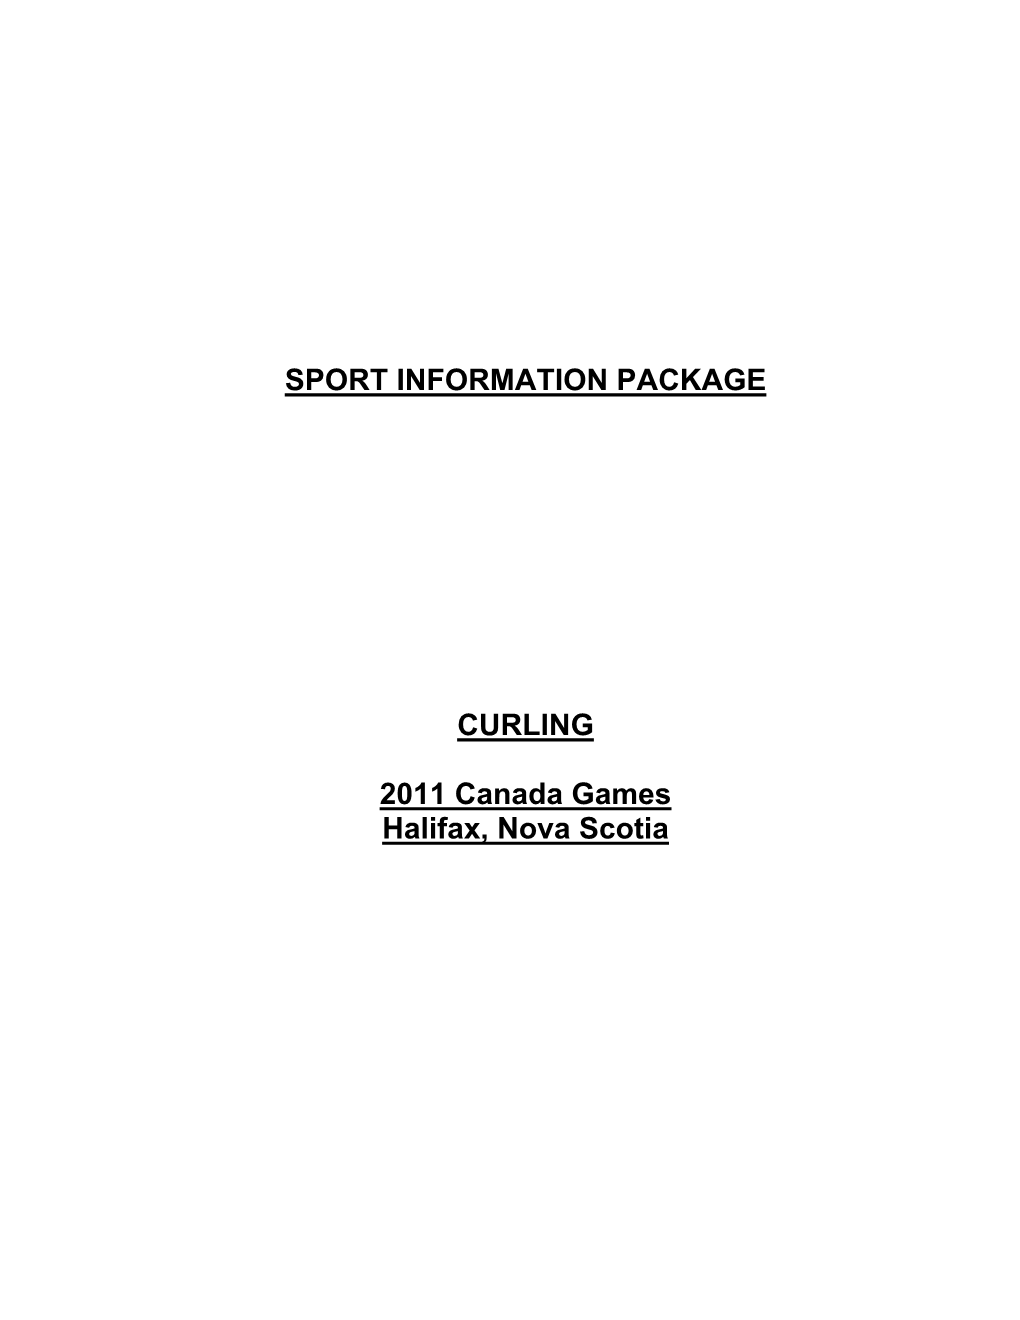 SPORT INFORMATION PACKAGE CURLING 2011 Canada Games